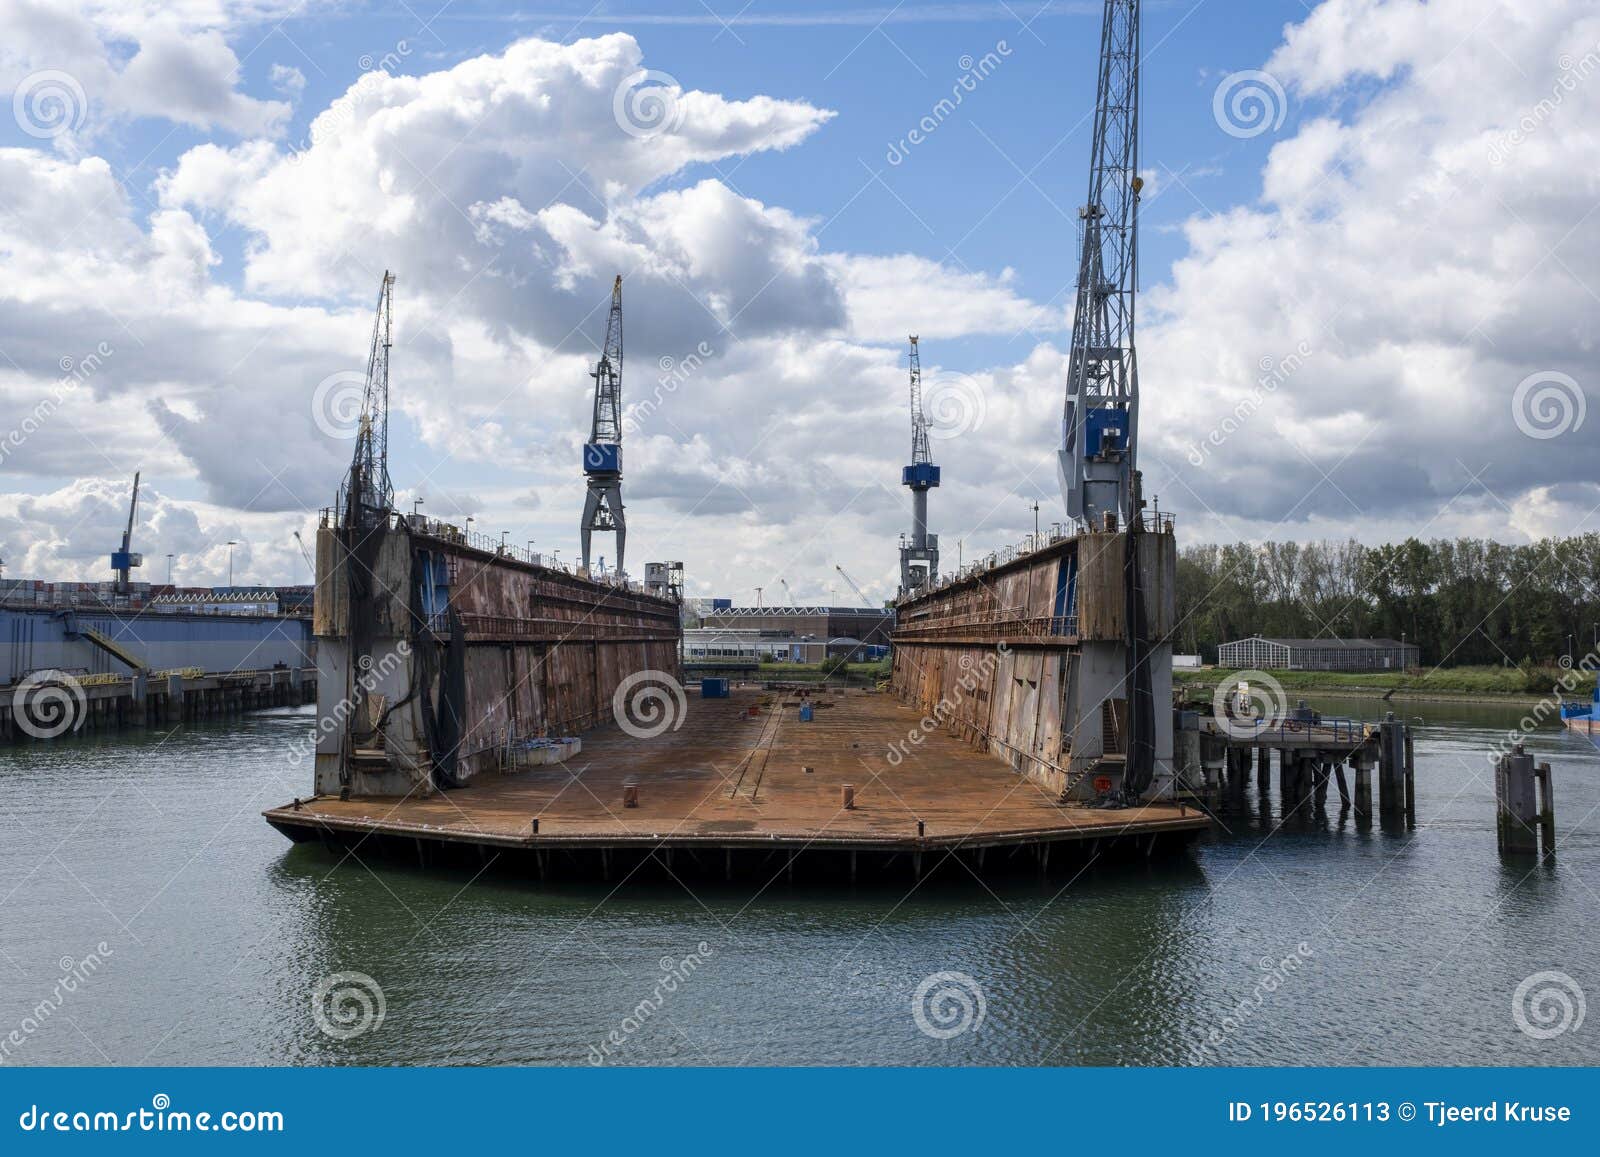 Draak hardware cruise Rotterdam, the Netherlands Eye Level View on an Empty Floating Dry Dock  with Large Cranes on the Side Stock Image - Image of crane, pier: 196526113